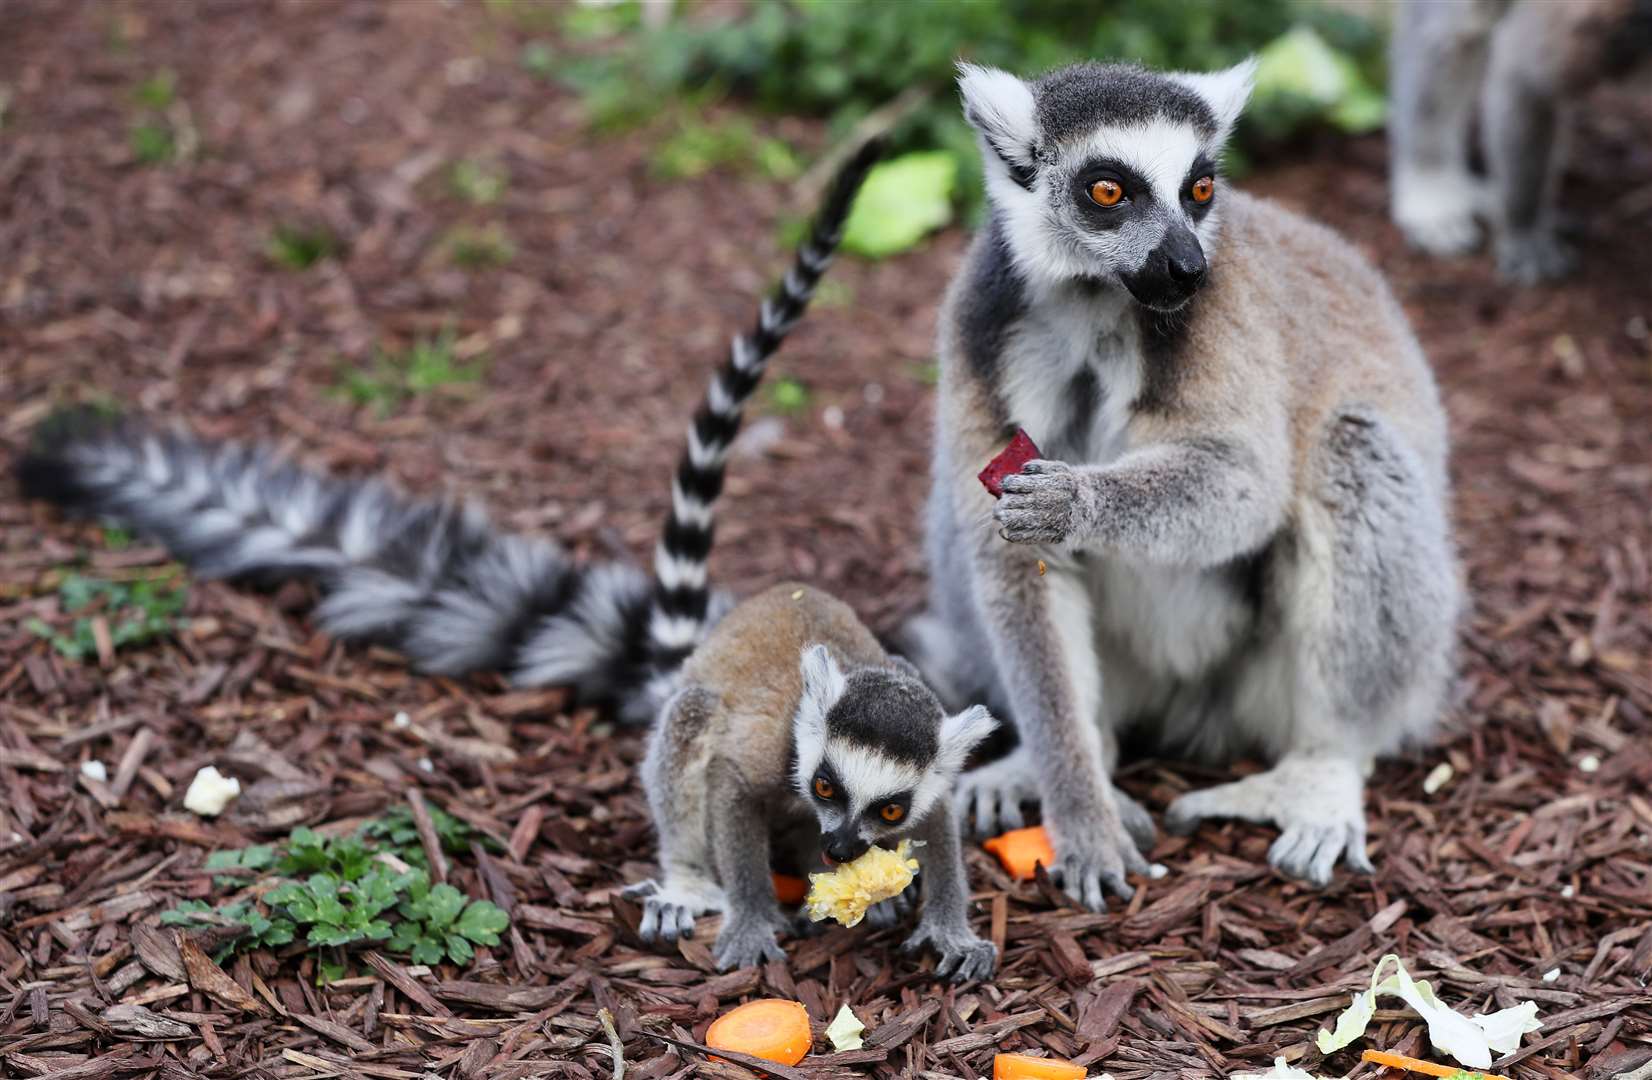 Lemurs are among the most popular primates kept as pets in the UK (Brian Lawless/PA)